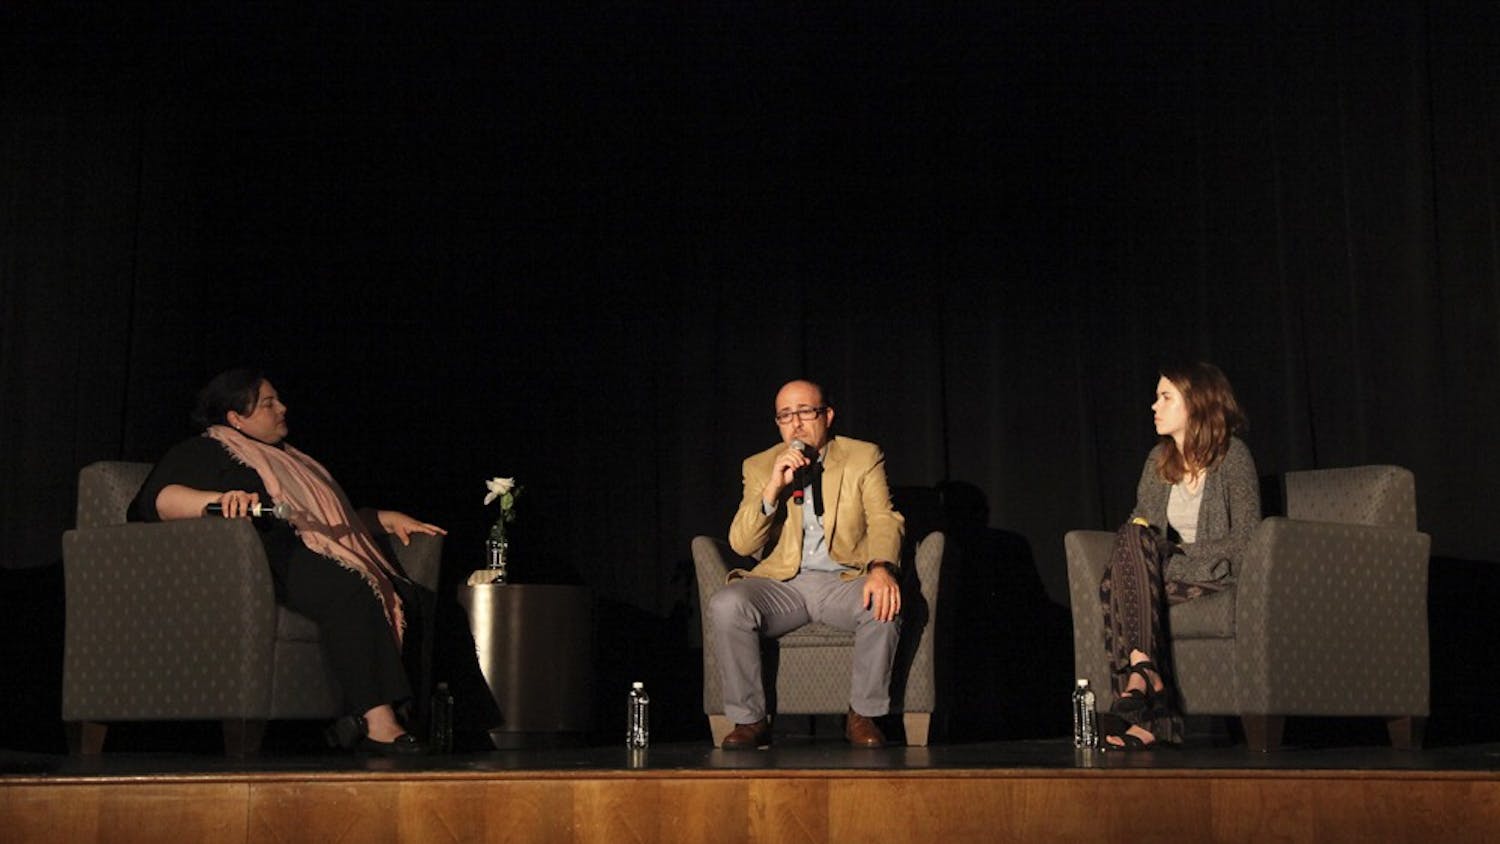 The UNC&nbsp;Arab Students Organization holds a Q&A with director Sam Kadi (center)  after a screening of the film  “Little Gandhi” in the Student Union auditorium on Wednesday night.